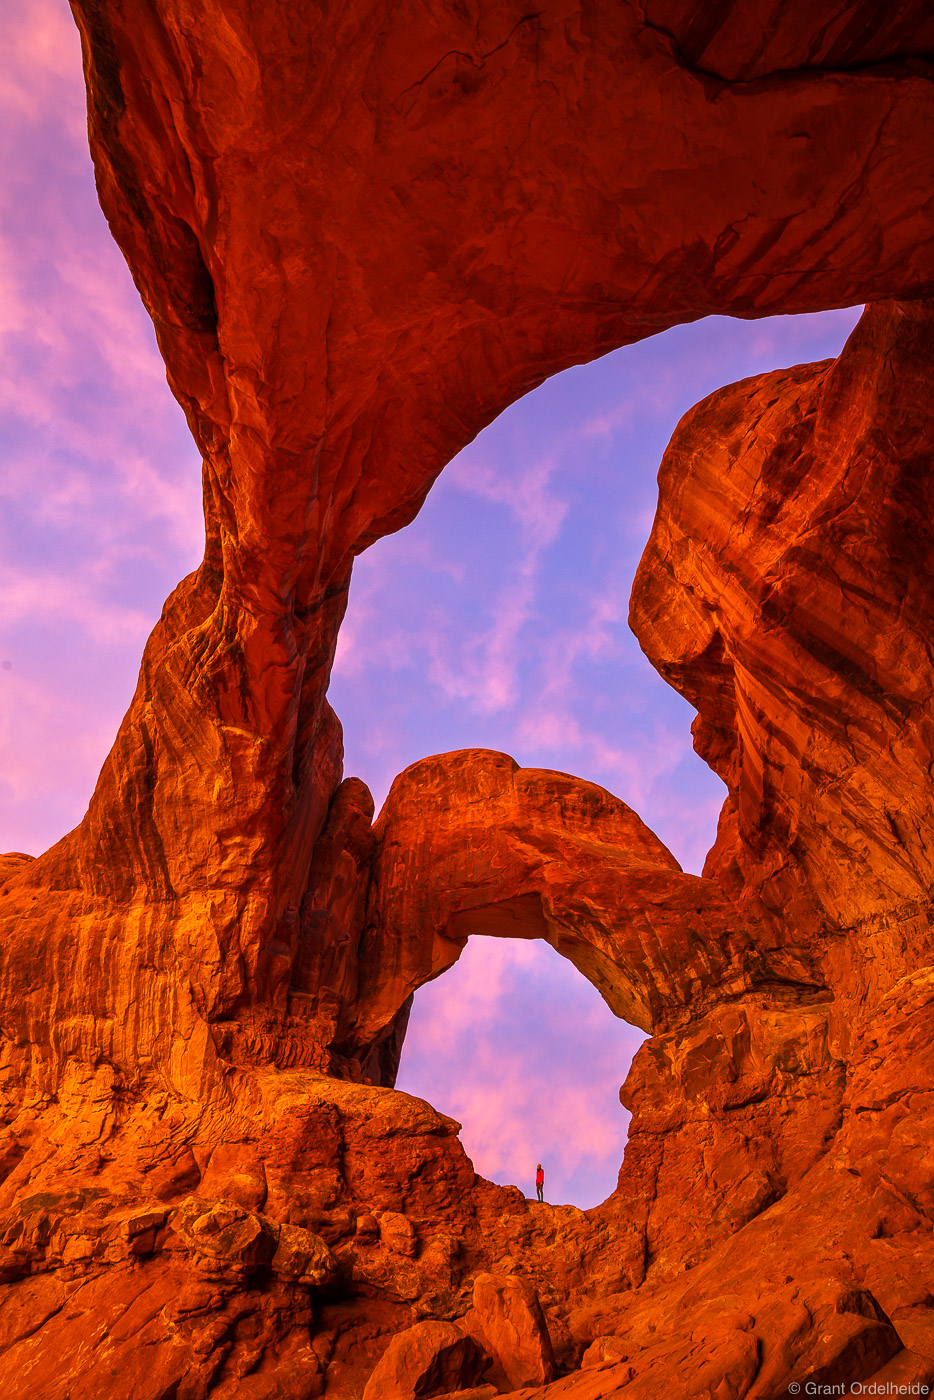 Pink sunrise over Double Arch in Arches National Park near Moab, Utah.